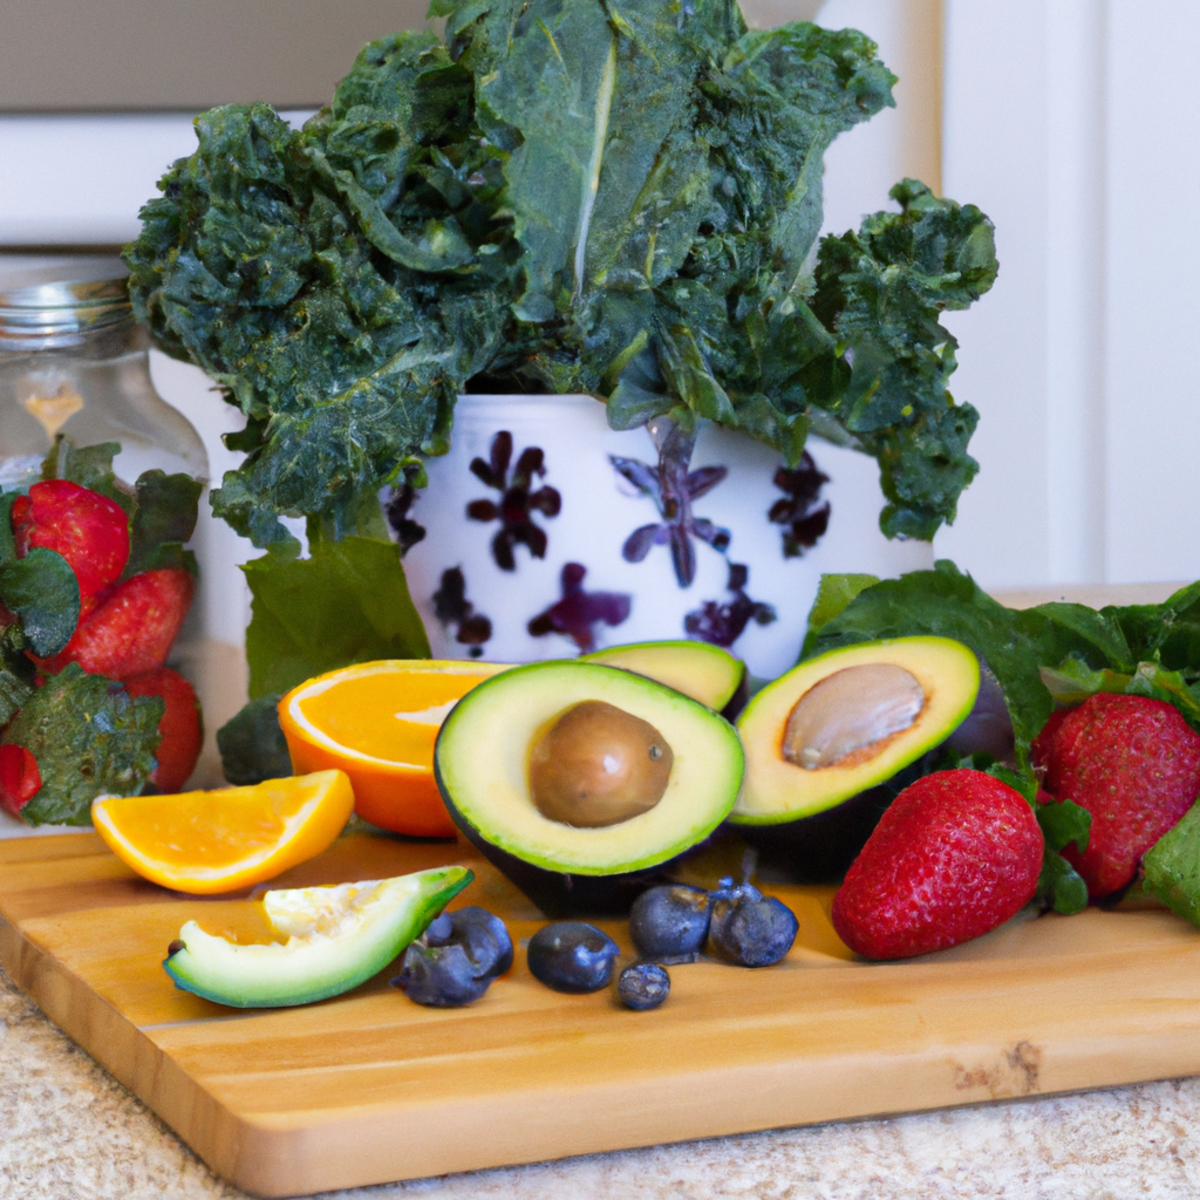 The photo features a colorful array of organic fruits and vegetables arranged on a wooden cutting board. A ripe avocado, sliced into halves, sits next to a bunch of bright green kale leaves and a handful of juicy red strawberries. A cluster of plump blueberries and a sliced orange complete the vibrant display. In the background, a glass jar filled with chia seeds and a small bowl of almond butter can be seen, adding to the wholesome and nutritious theme of the photo. The image exudes a sense of freshness and vitality, perfectly capturing the essence of the article's focus on using organic foods to enhance workout performance.